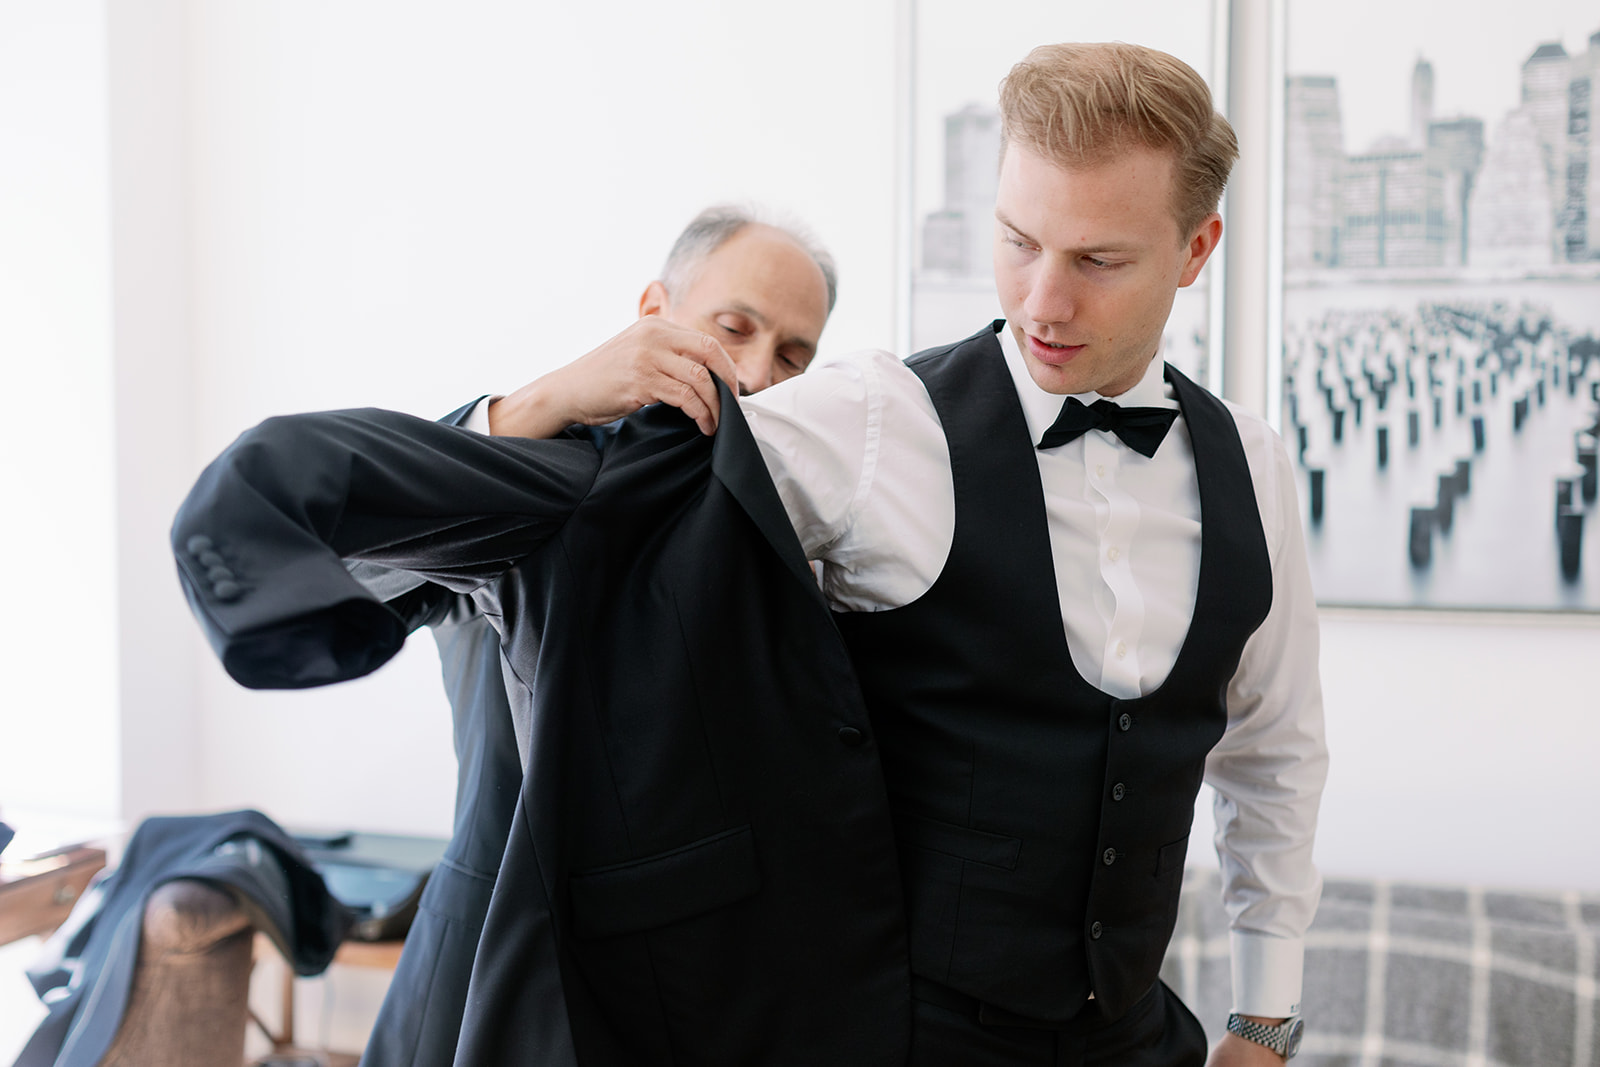 Groom getting ready, a heartfelt moment with his father helping him into the suit jacket in this New York wedding capture.